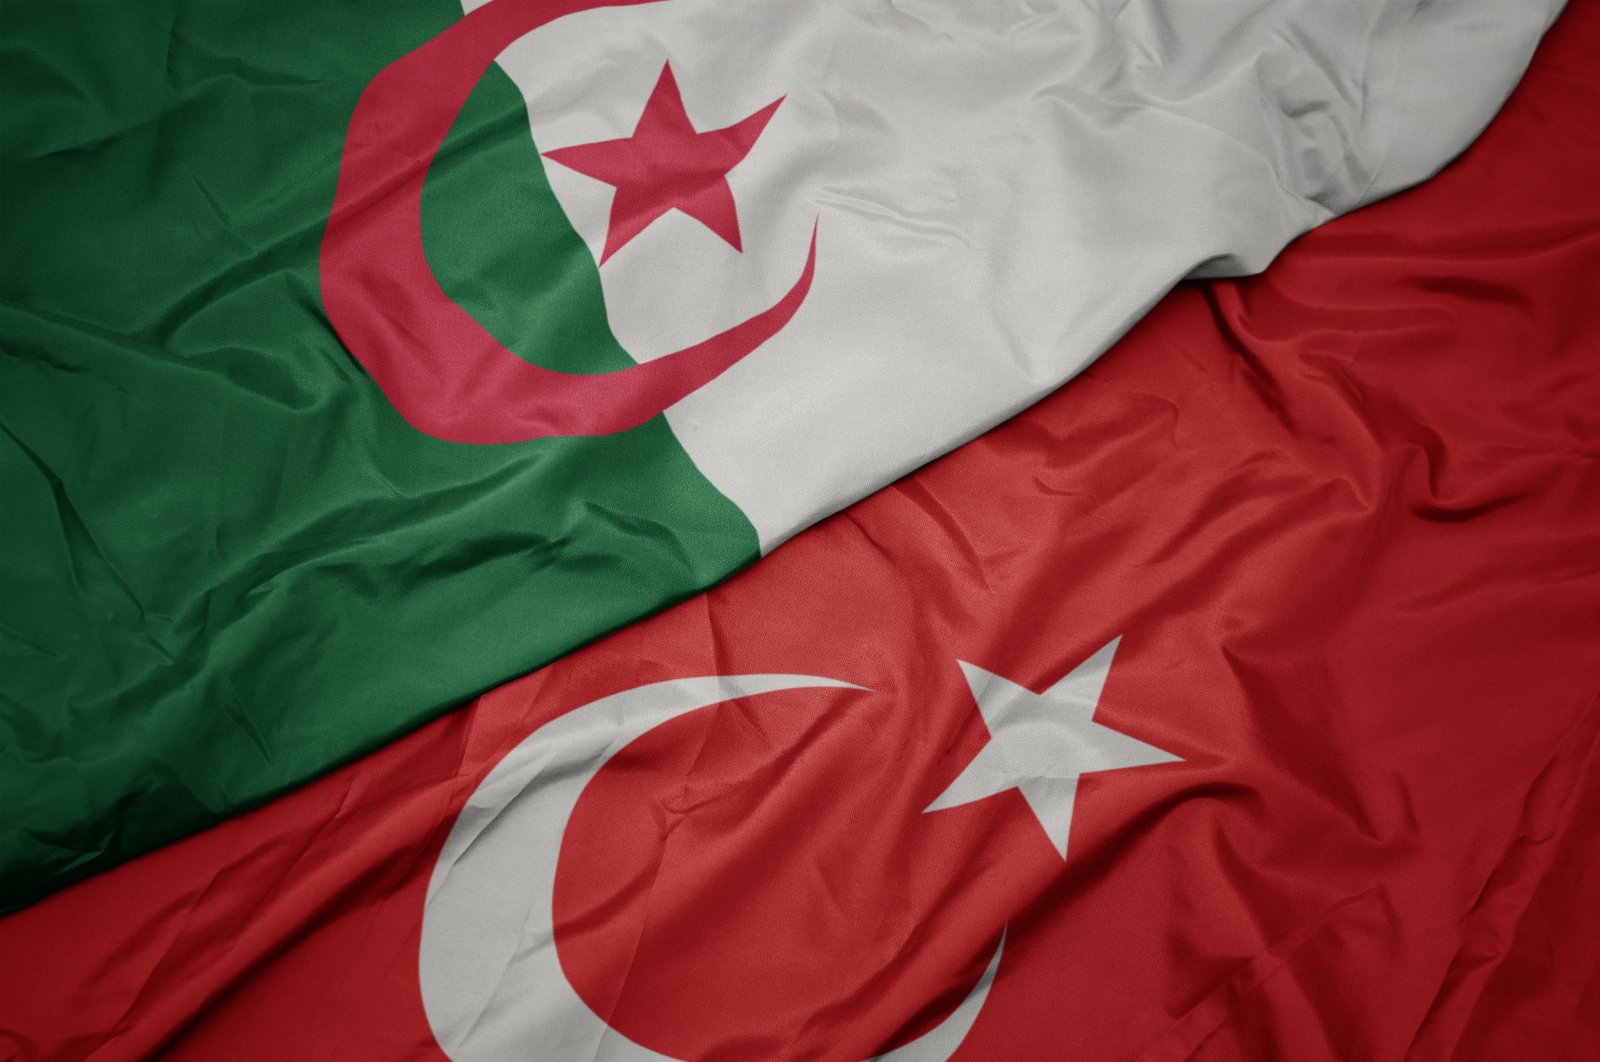 The flags of Turkey and Algeria. (Photo by Shutterstock)